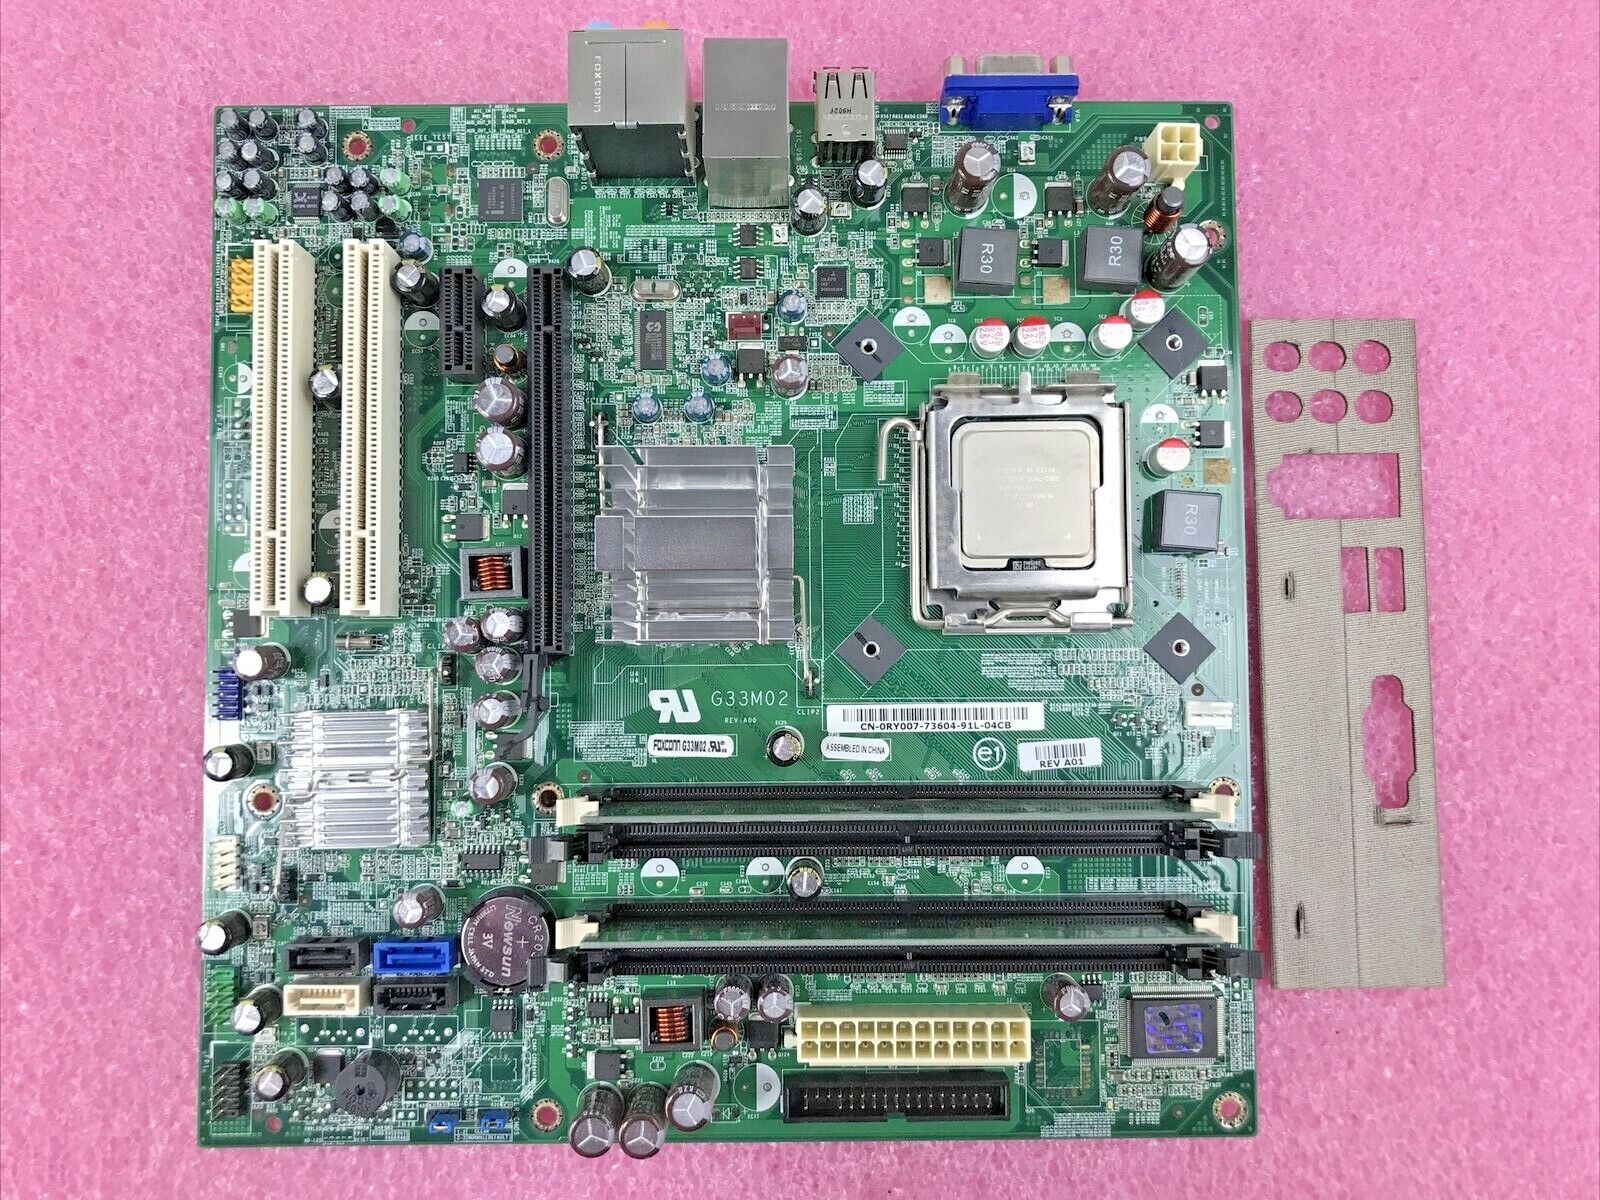 Dell 0RY007 Motherboard Intel Pentium E5300 2.60GHz 2GB RAM with I/O Shield